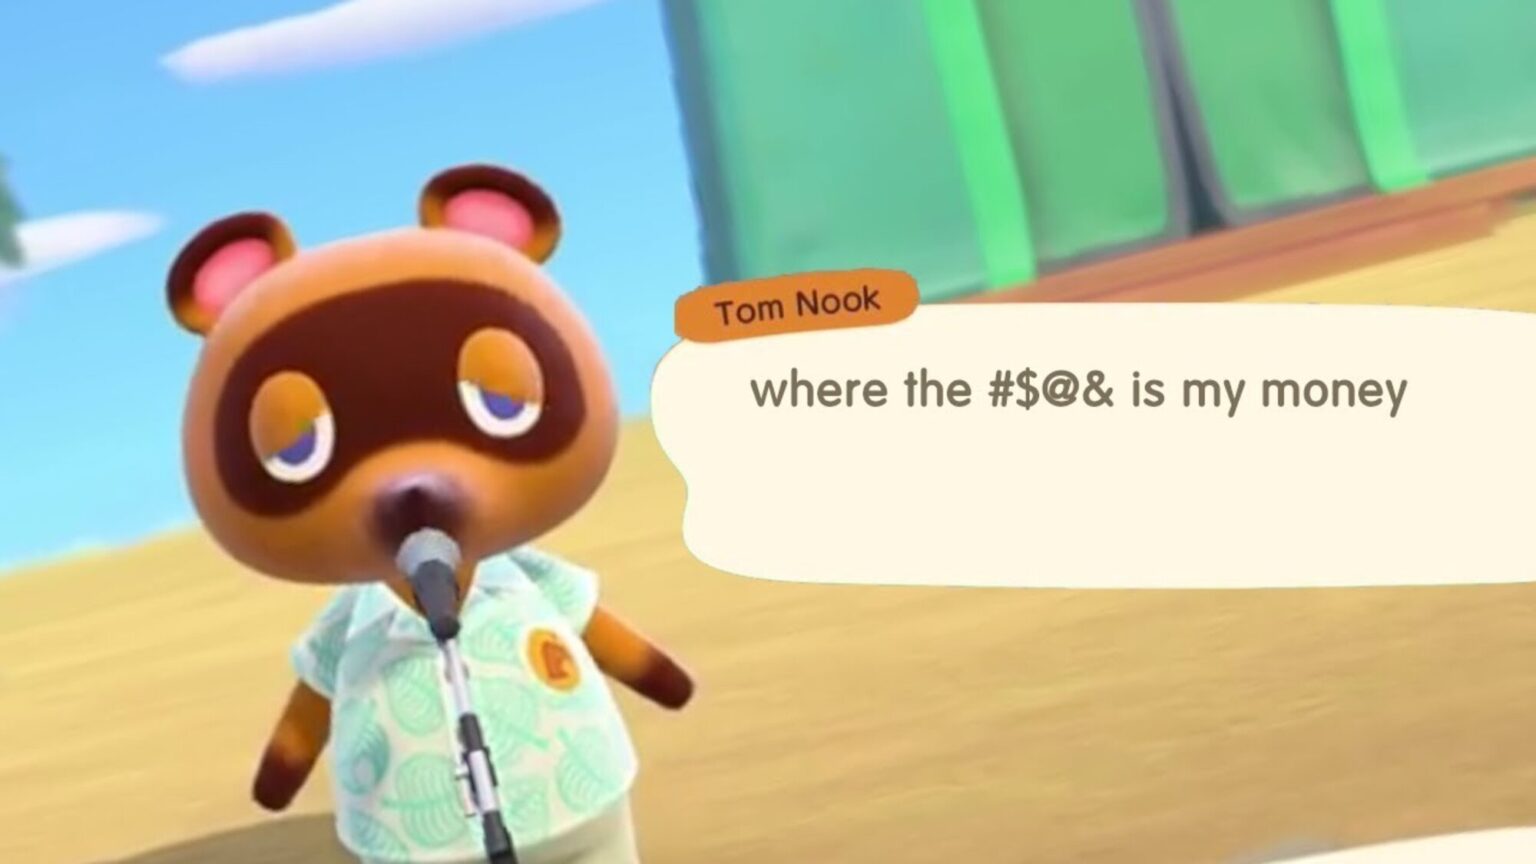 If you're a fan of 'Animal Crossing', then we're sure you're just as obsessed with the character Tom Nook as we are. Check out our fave Tom Nook memes here.